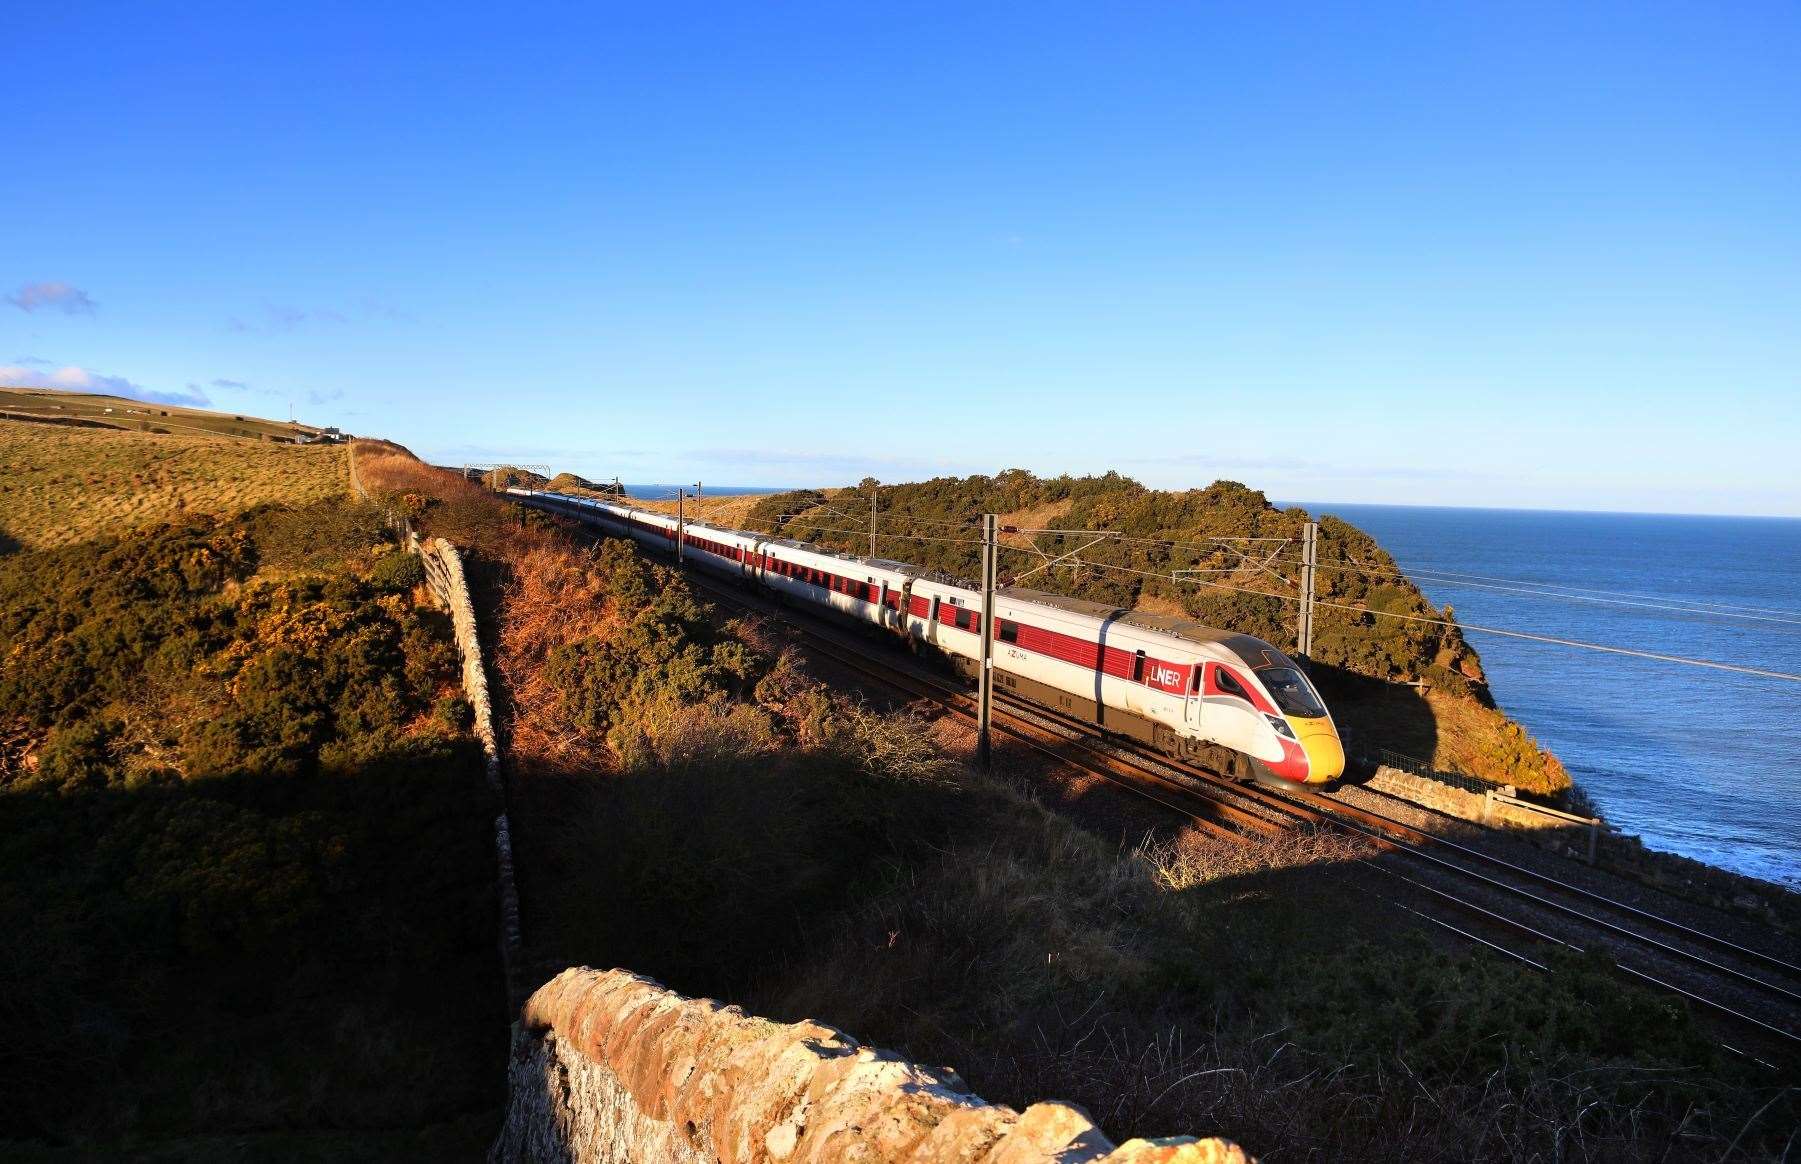 The LNER service is a vital connection between Inverness and England.